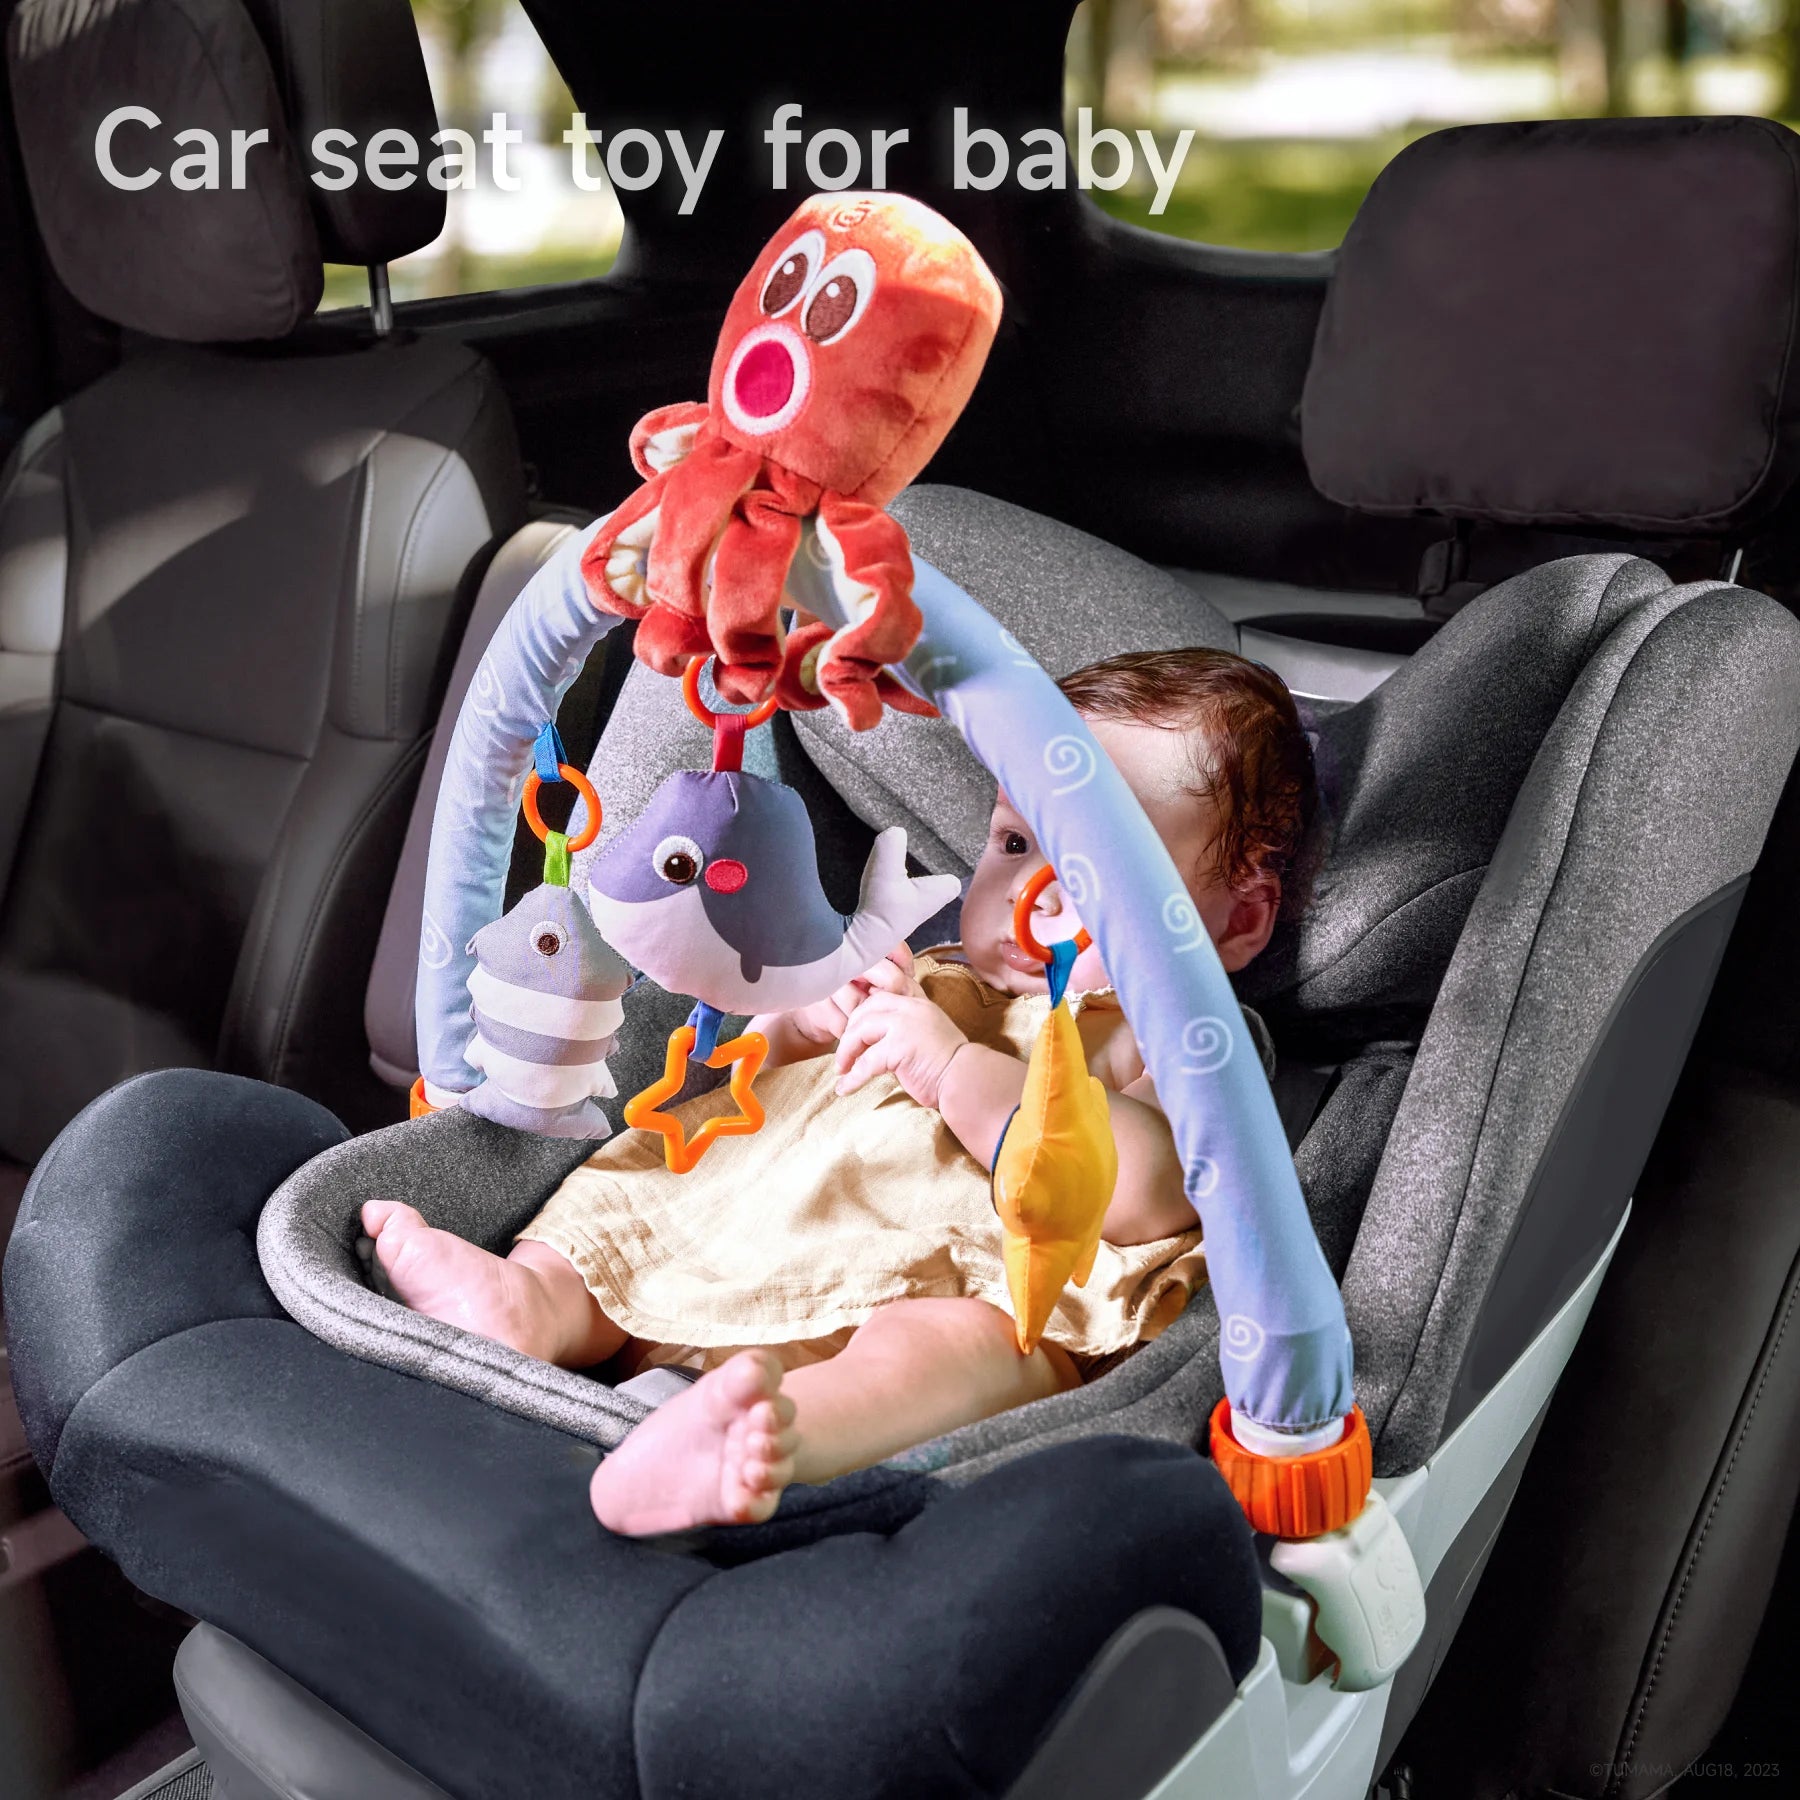 Baby arch pram play toys with cute underwater characters